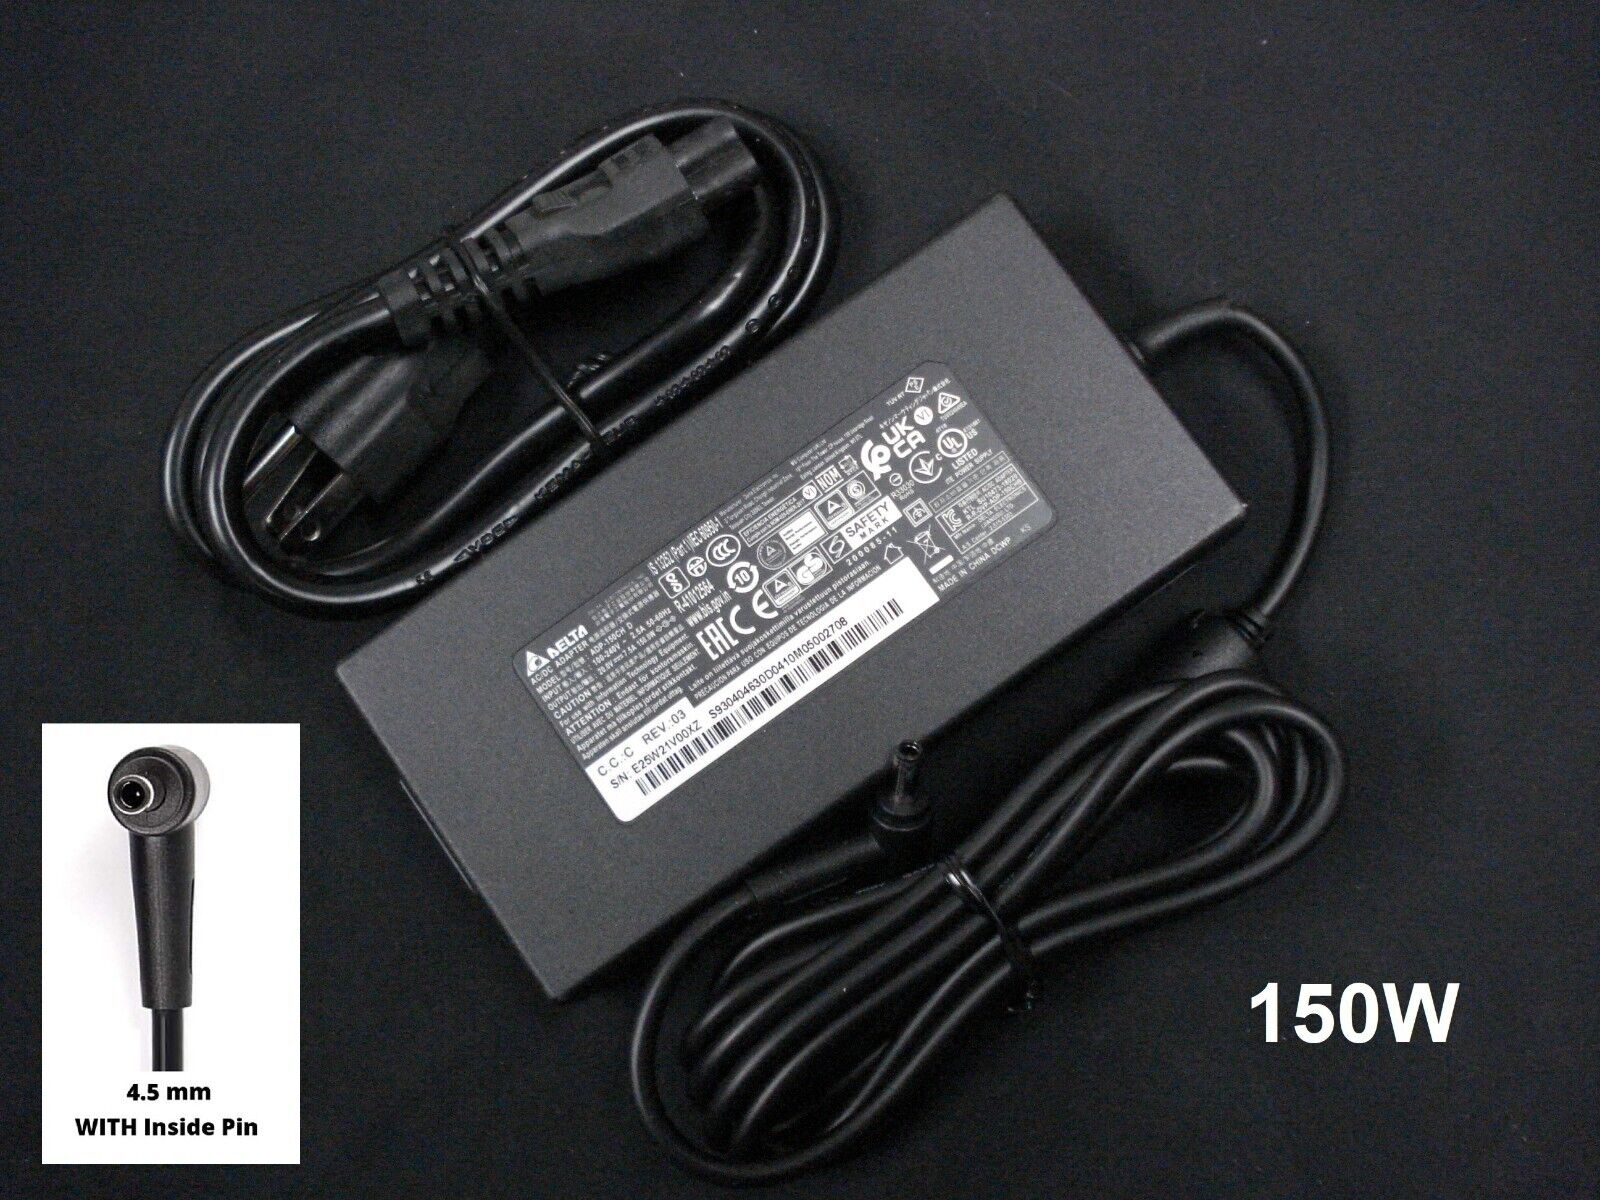 MSI /Delta 20V 150W Charger For Stealth 15M Series 957-15621P-104 ADP-150CH D